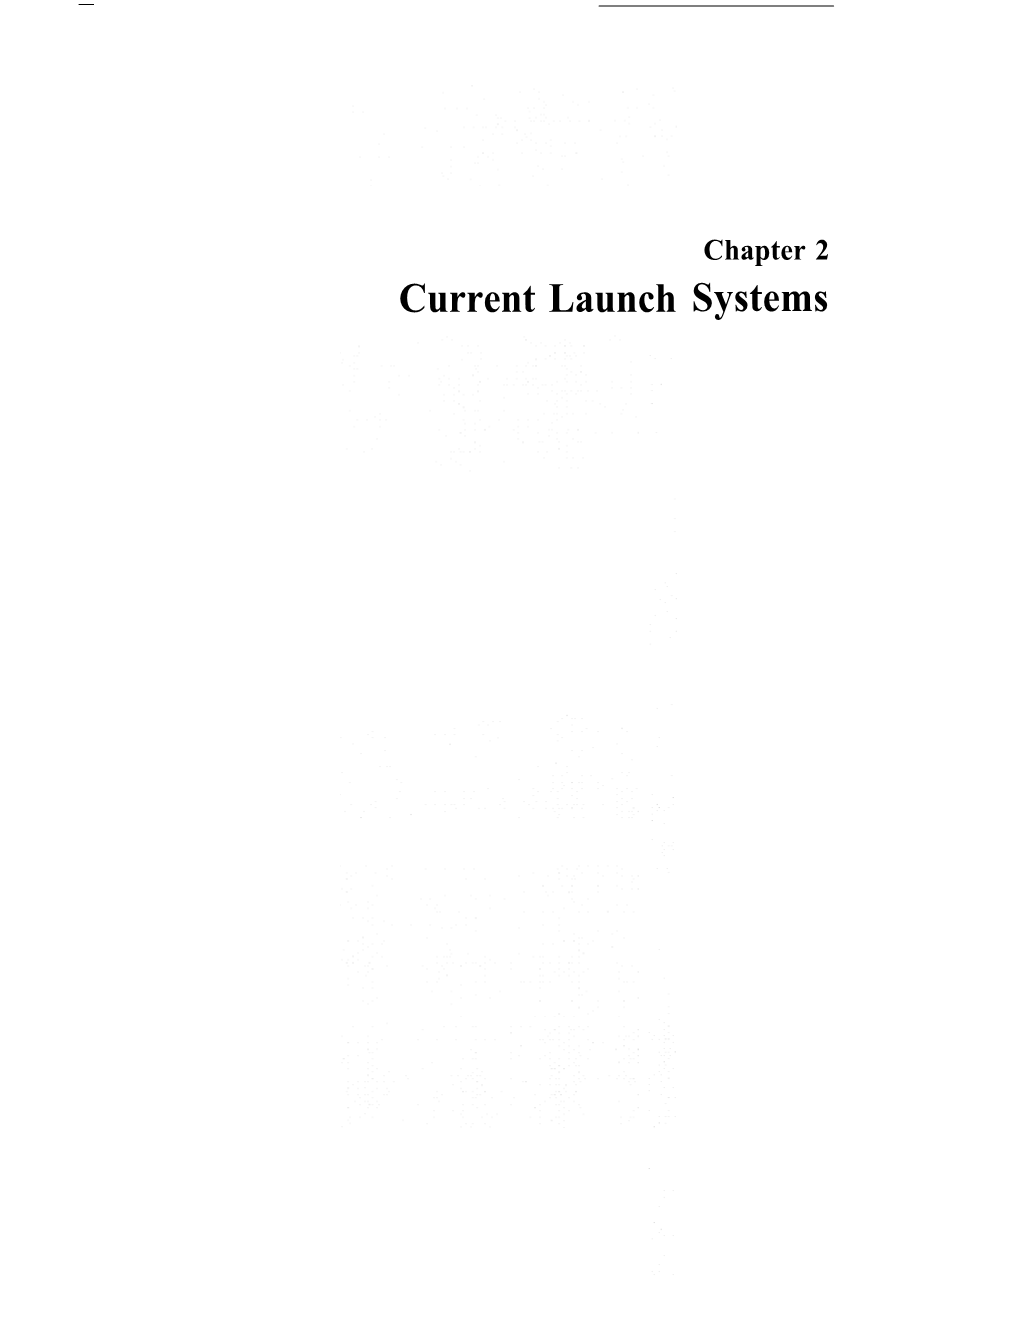 2: Current Launch Systems